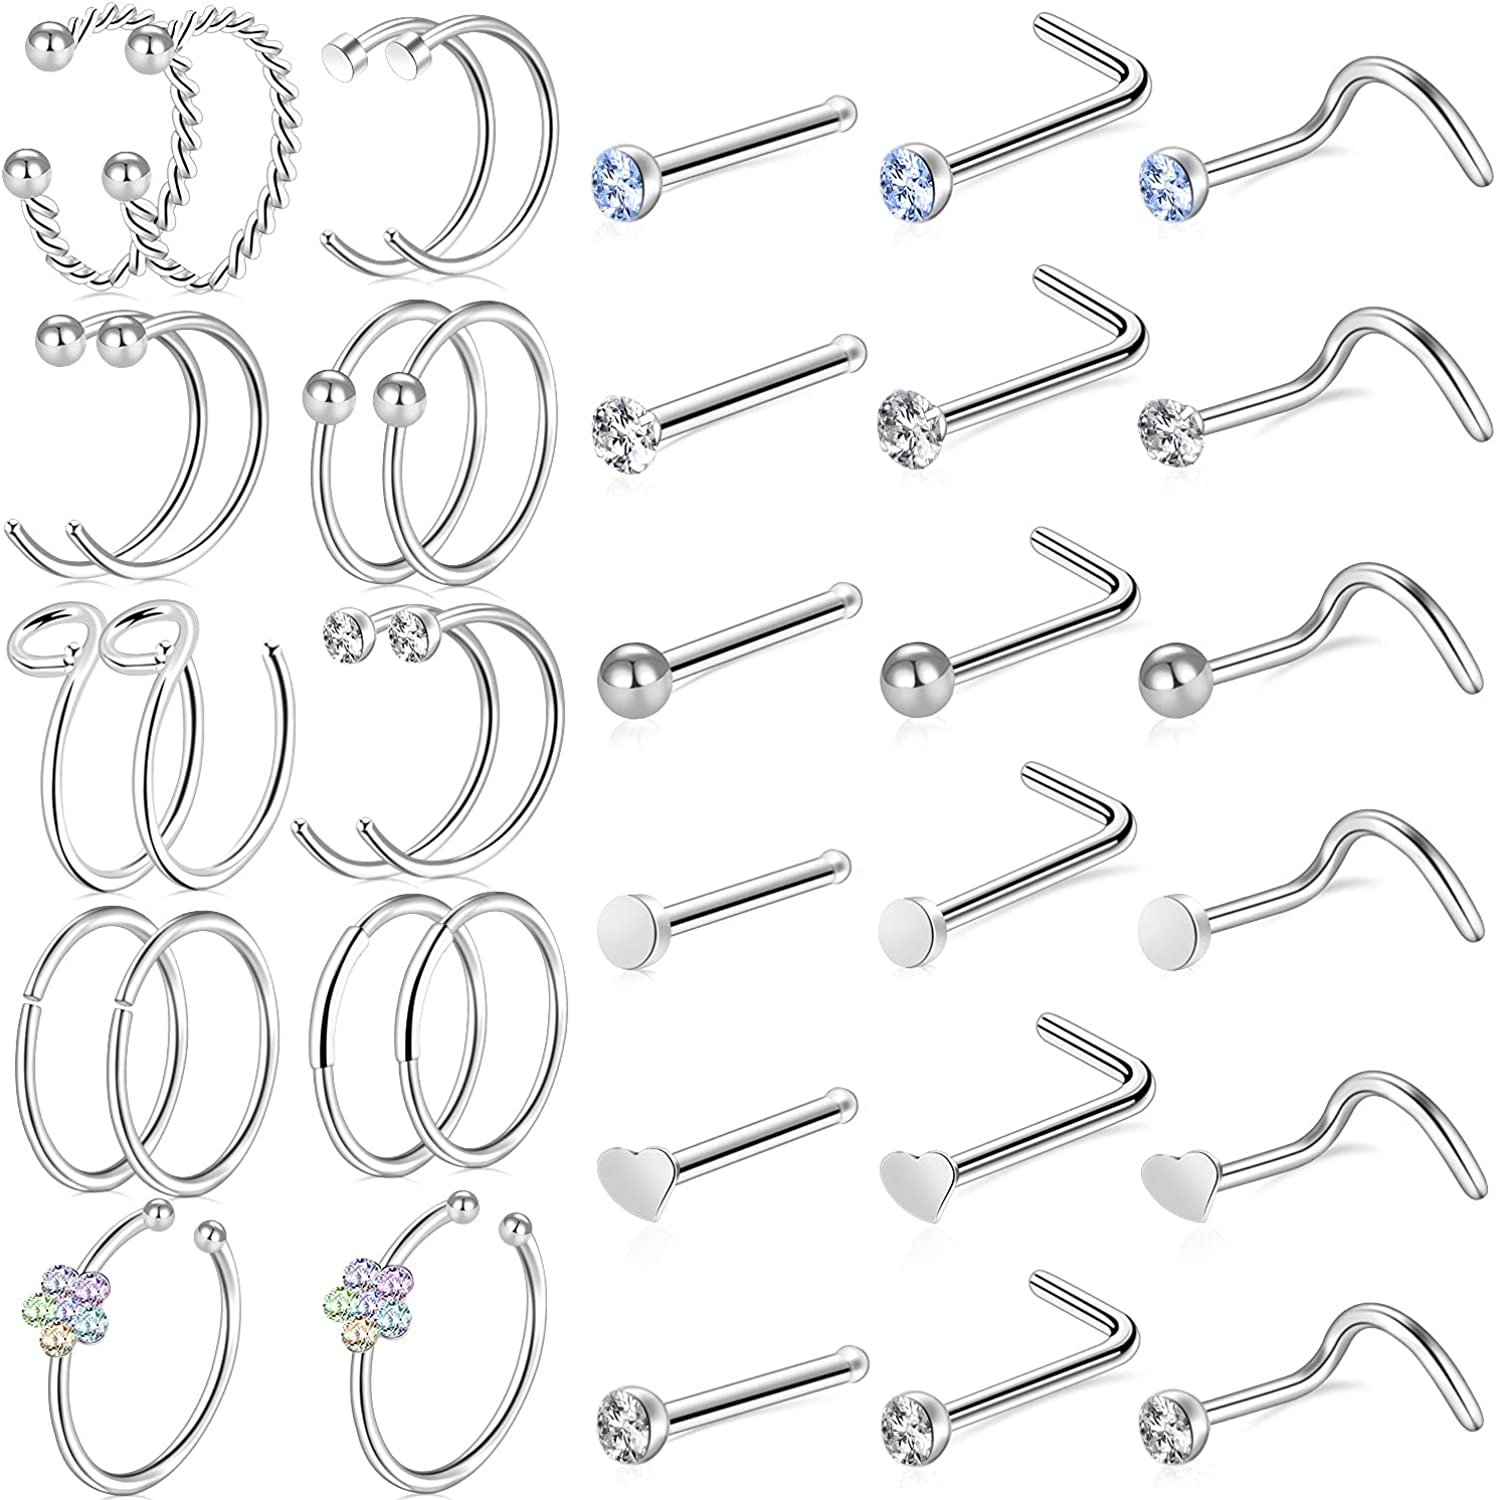 ONESING 9-60 Pcs Nose Rings for Women Nose Piercings Jewelry Nose Studs 20G Nose Rings Hoop Gold Screw Stainless Steel for Women Men